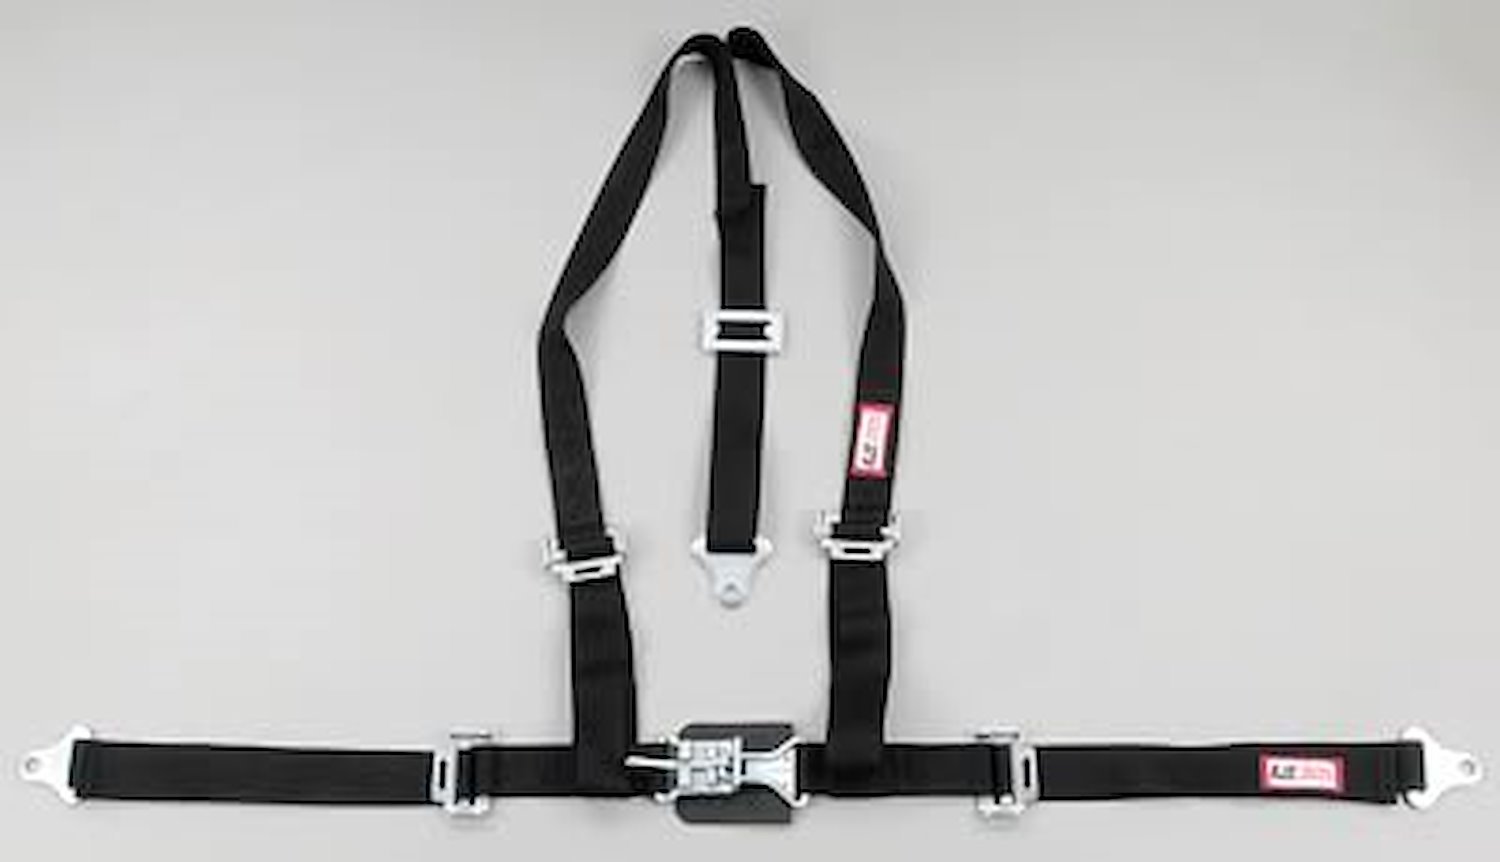 NON-SFI L&L HARNESS 3 PULL UP Lap Belt SEWN IN 2 S.H. Individual ROLL BAR Mount w/STERNUM STRAP ALL WRAP ENDS BLUE